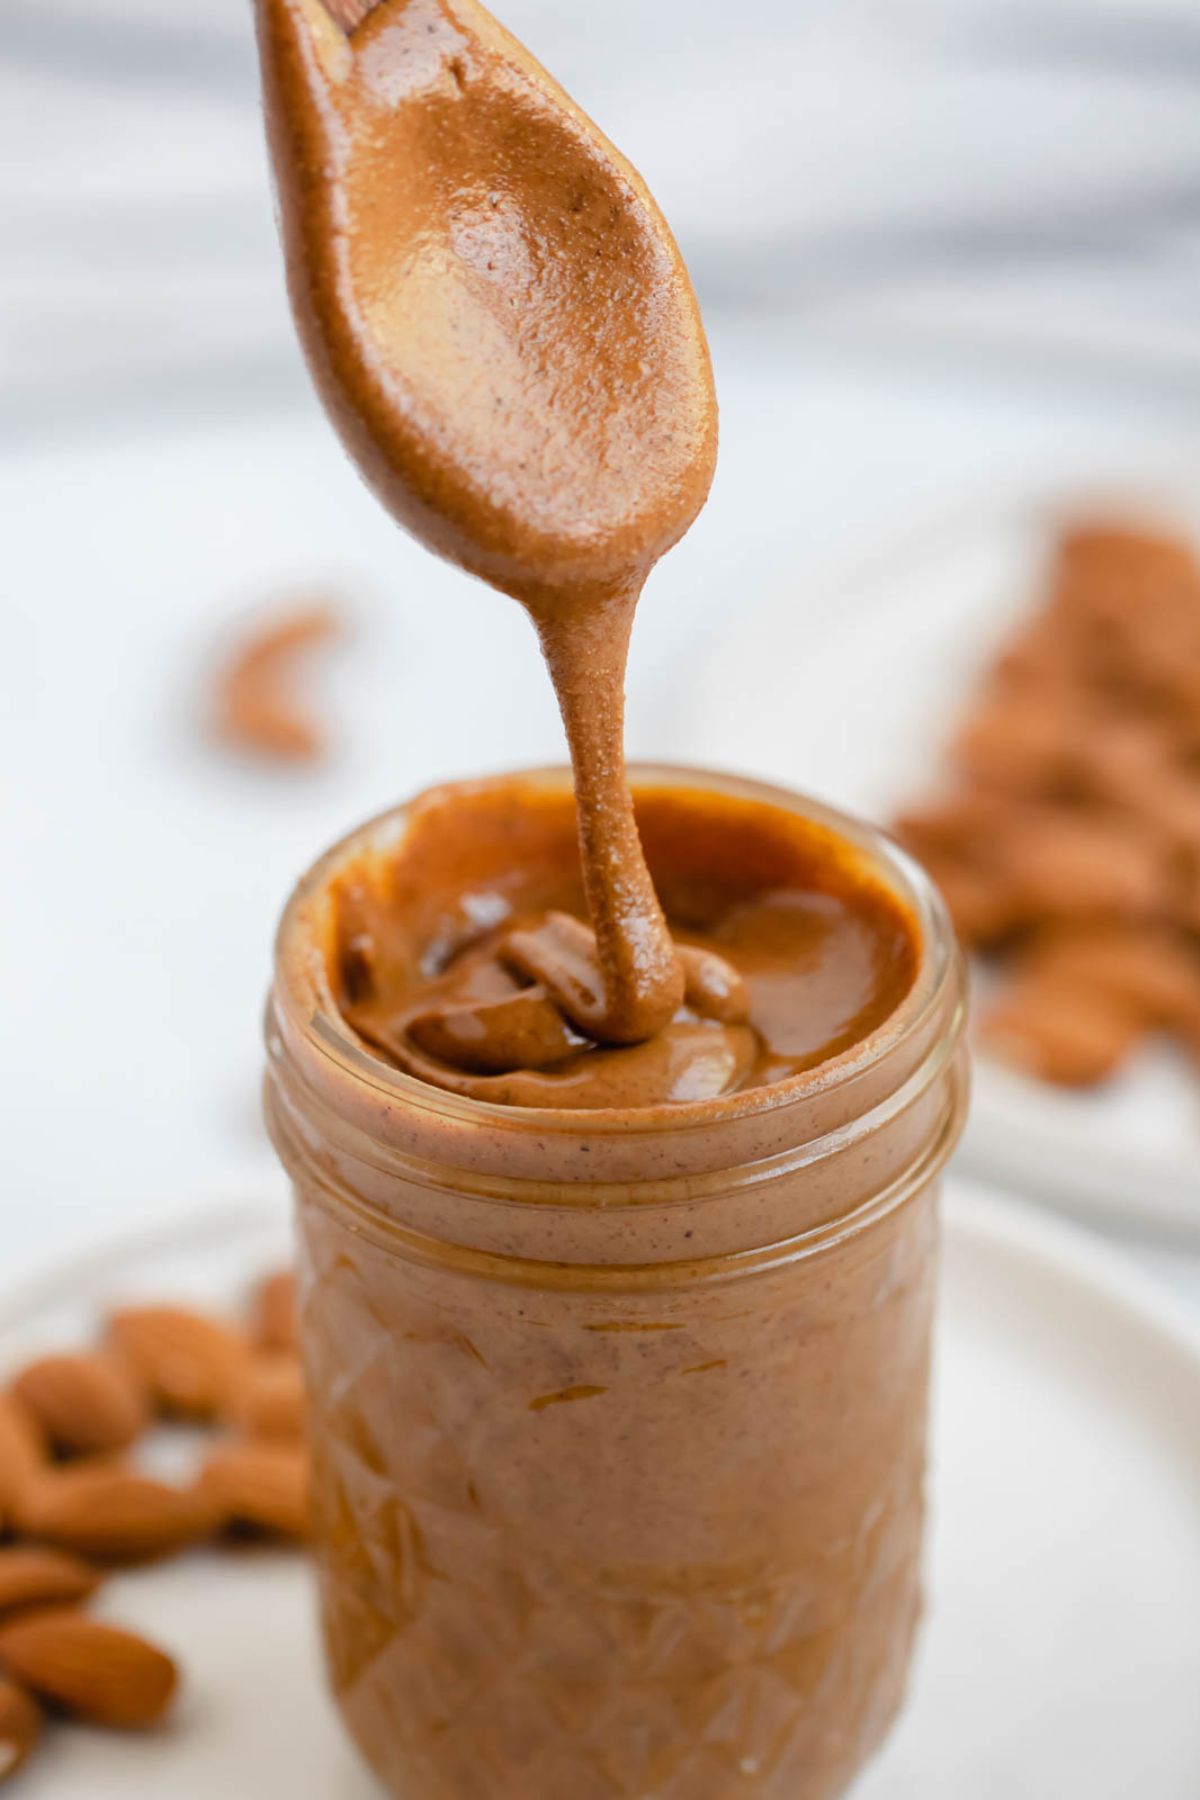 Drizzle shot of almond butter.